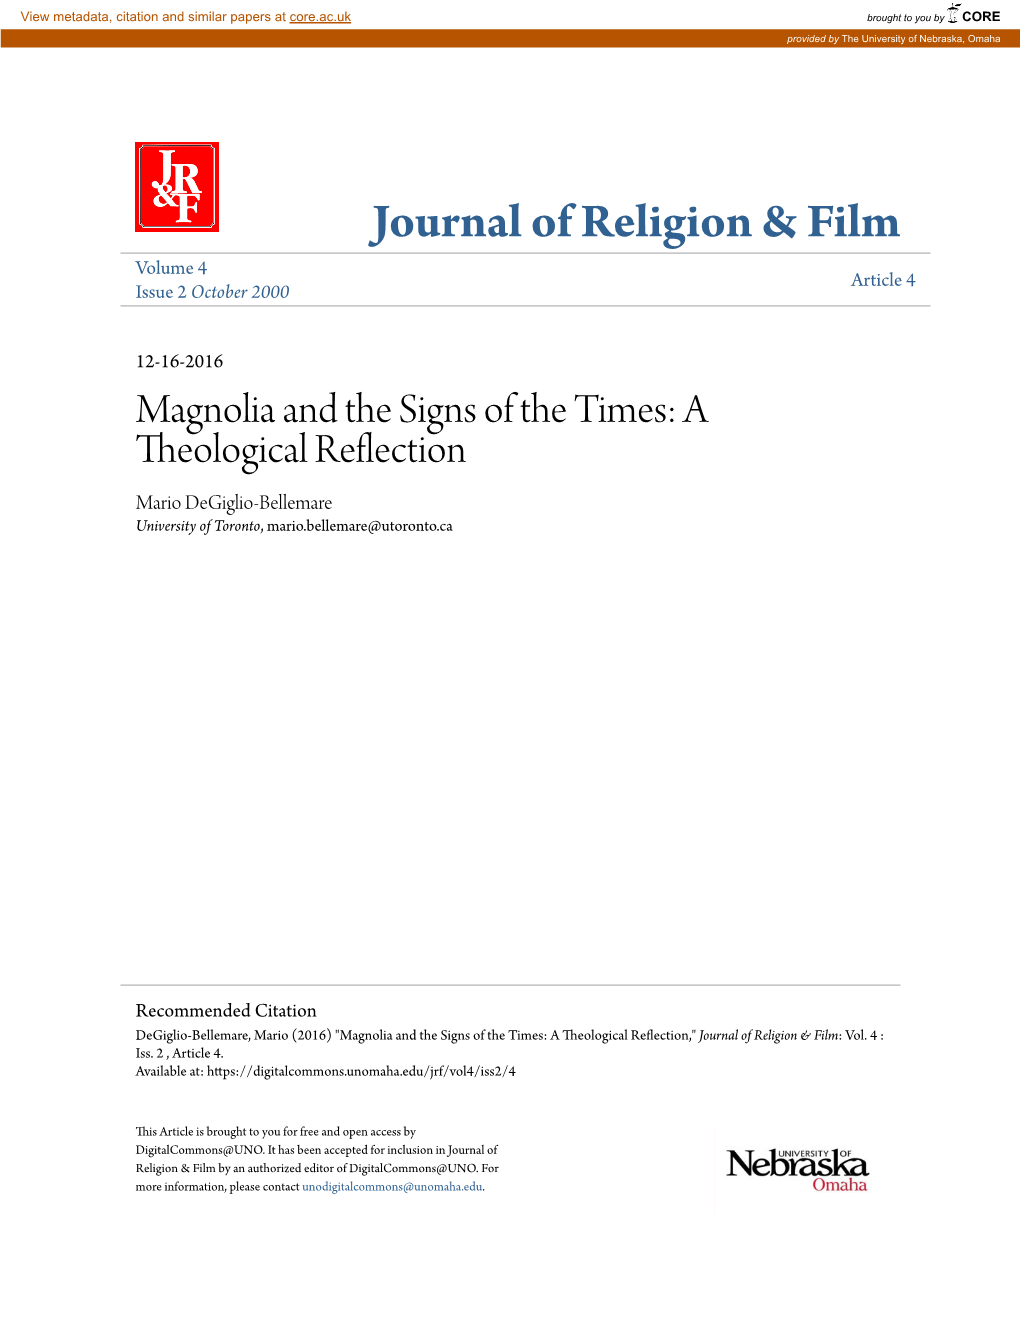 Magnolia and the Signs of the Times: a Theological Reflection Mario Degiglio-Bellemare University of Toronto, Mario.Bellemare@Utoronto.Ca